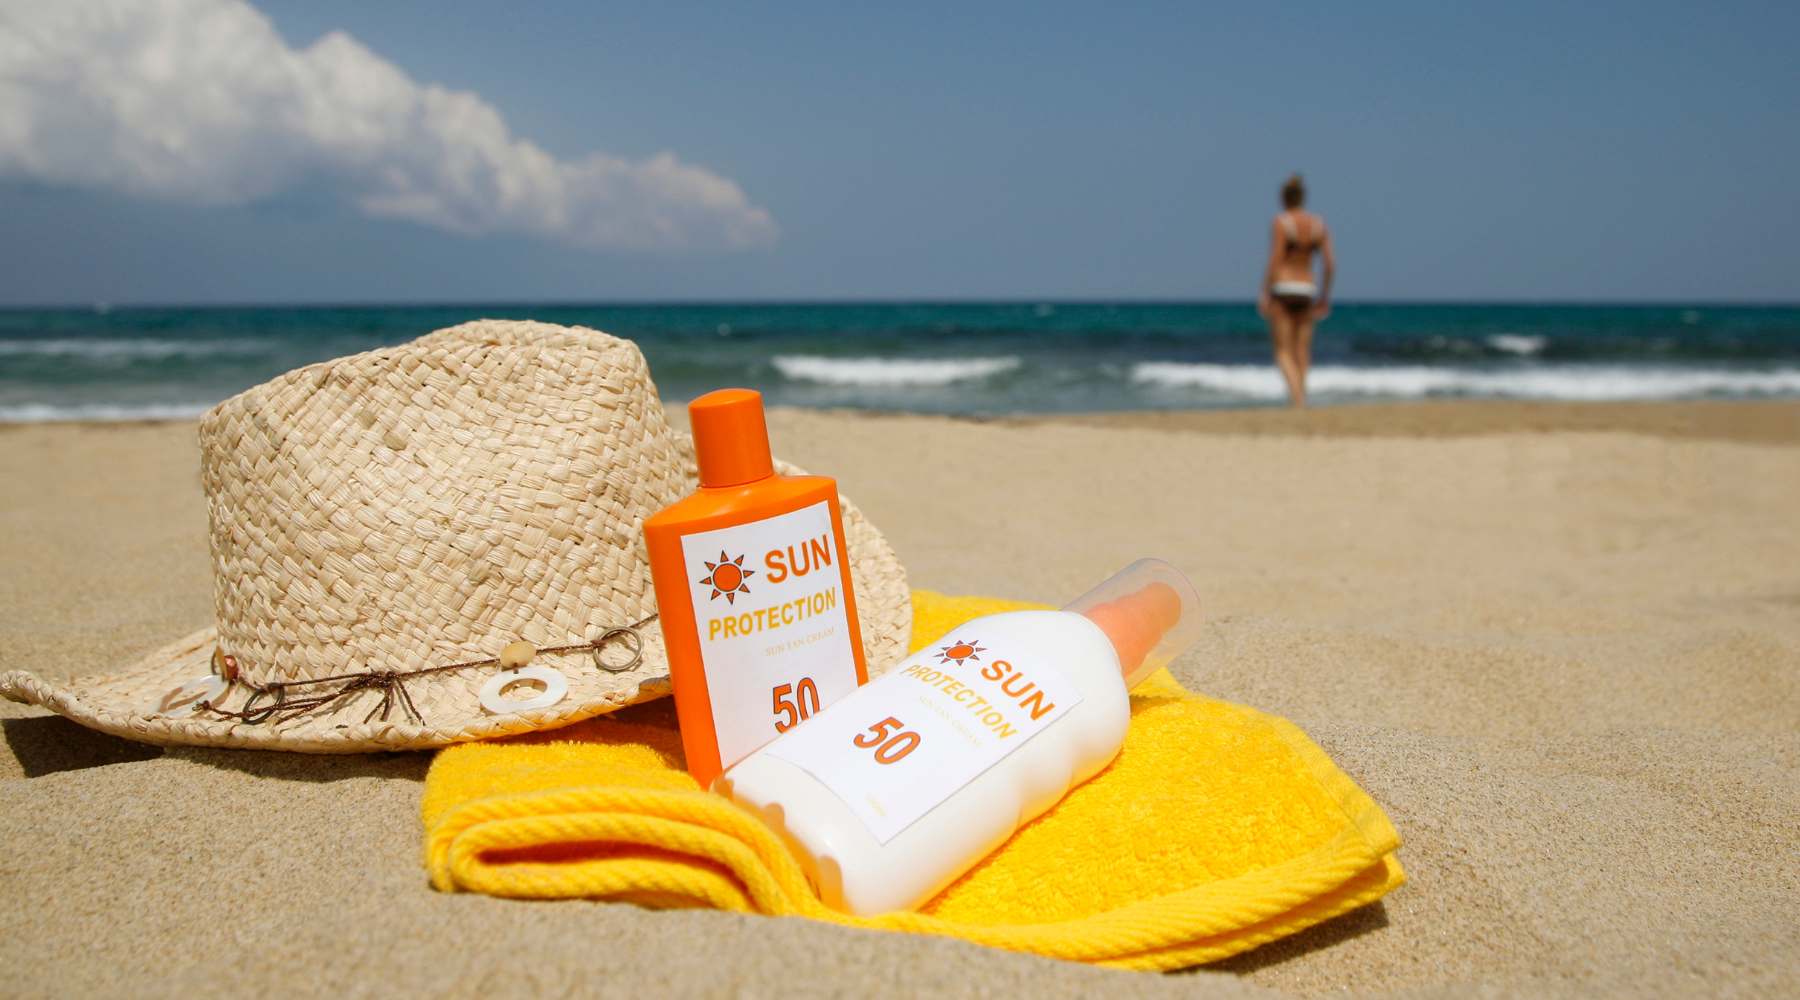 Hat, sunscreen, and a towel at the beach—Sun protection tips